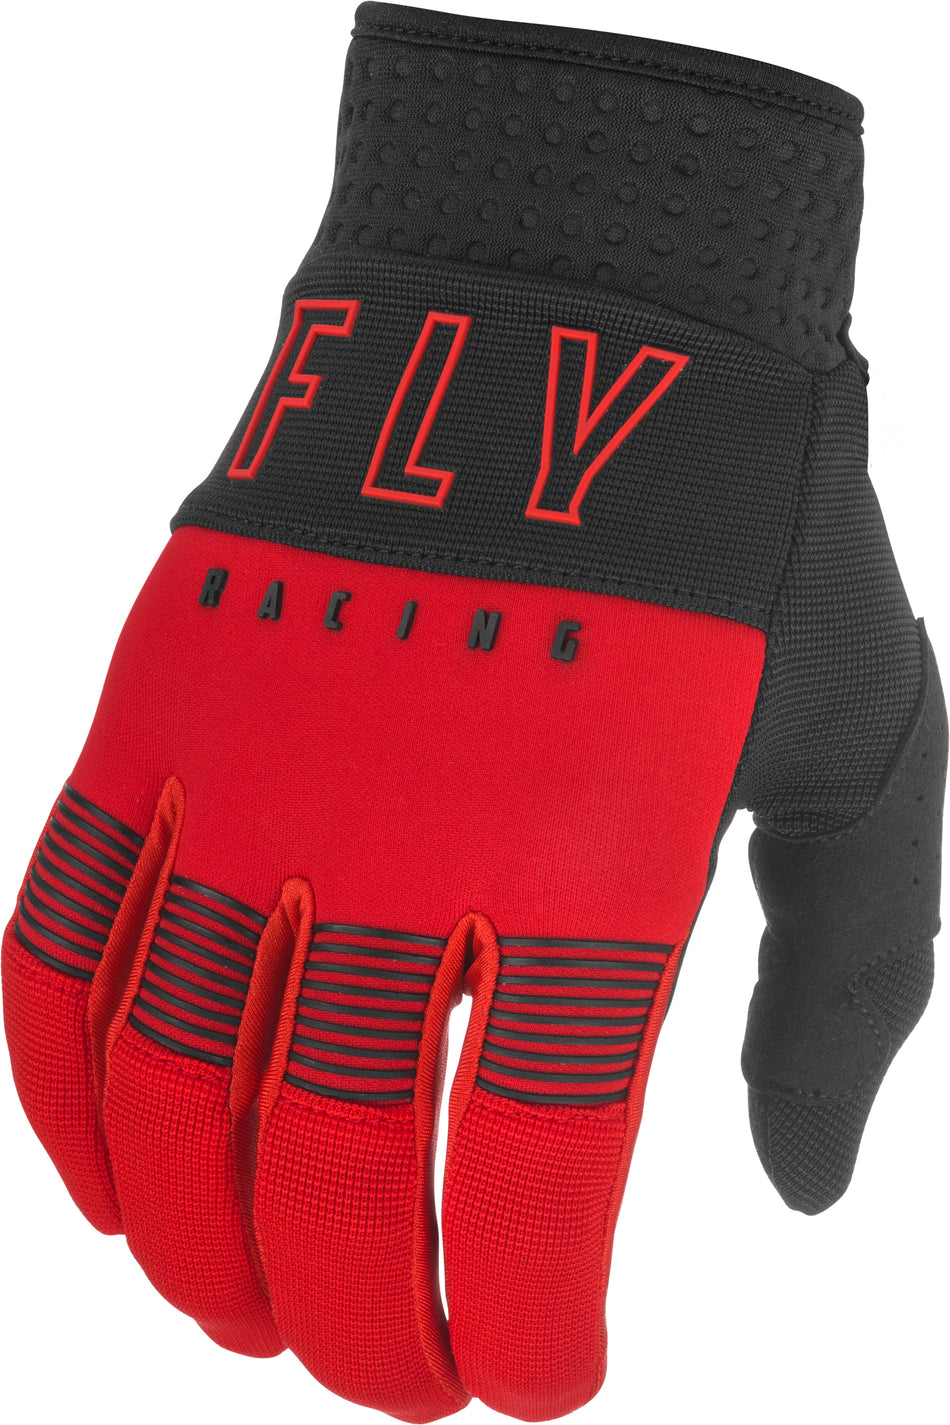 FLY RACING Youth F-16 Gloves Red/Black Sz 05 374-91205